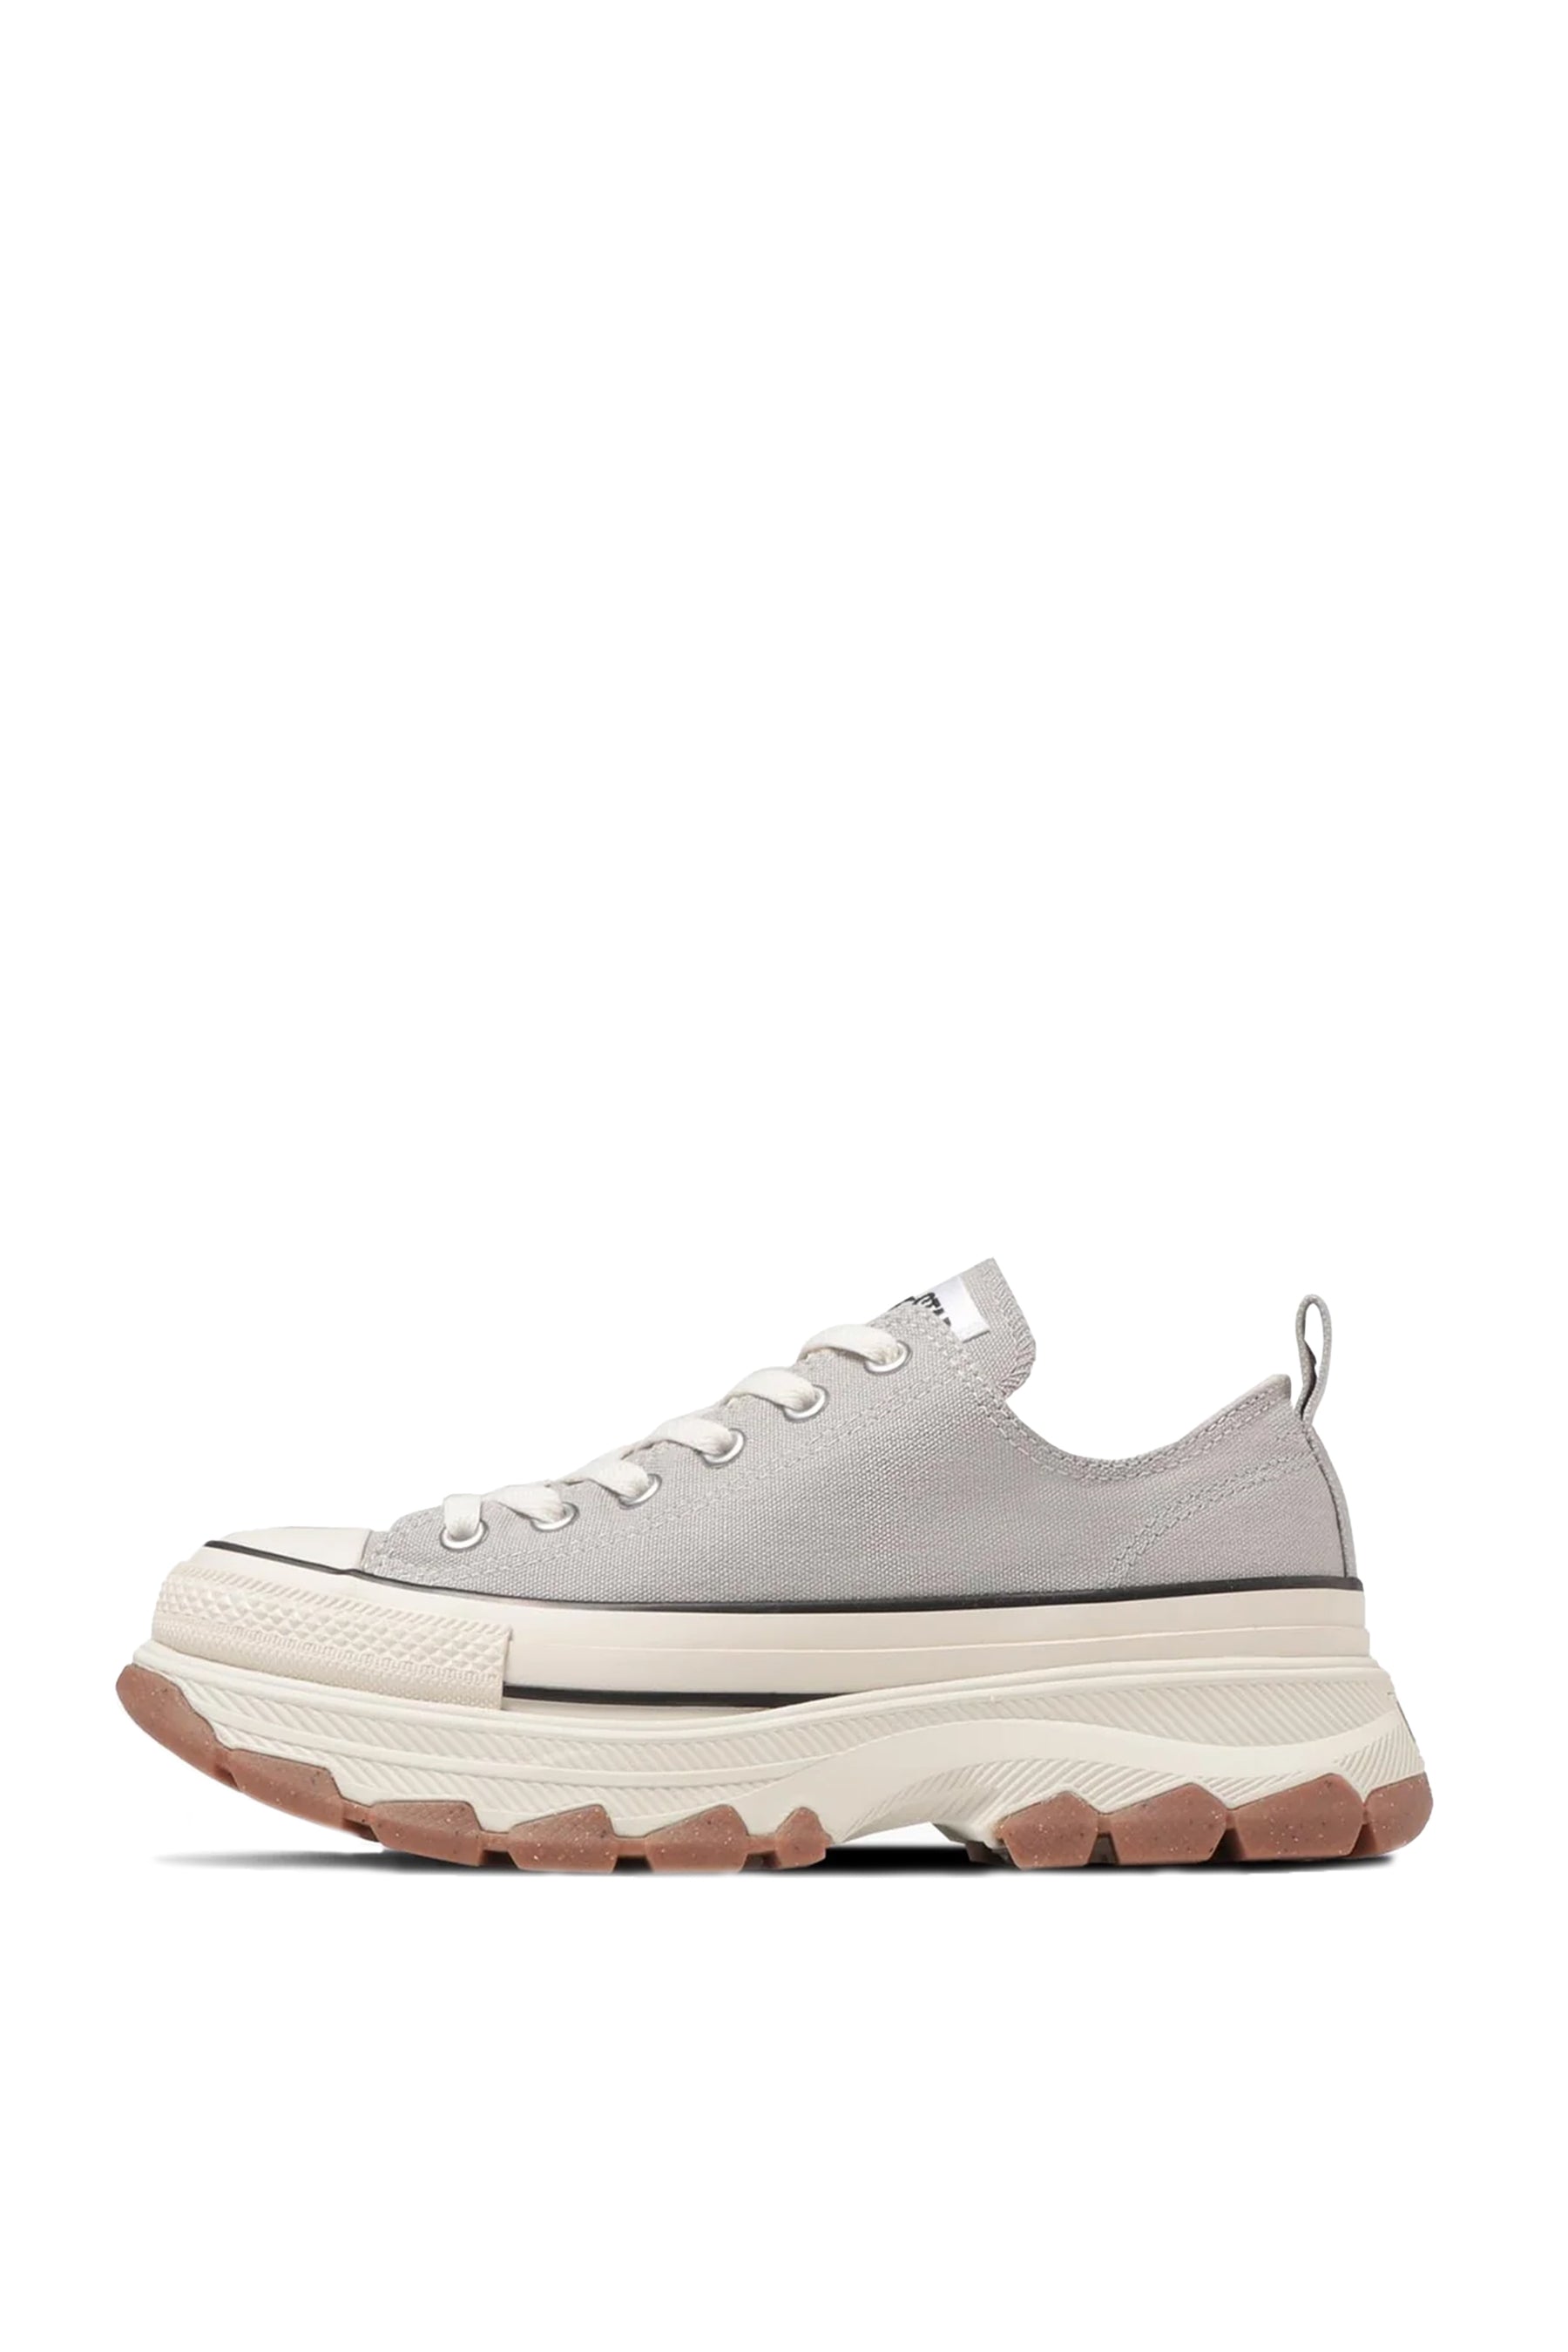 CONVERSE SS23 ALL STAR TREKWAVE OX / ICE GRY -NUBIAN